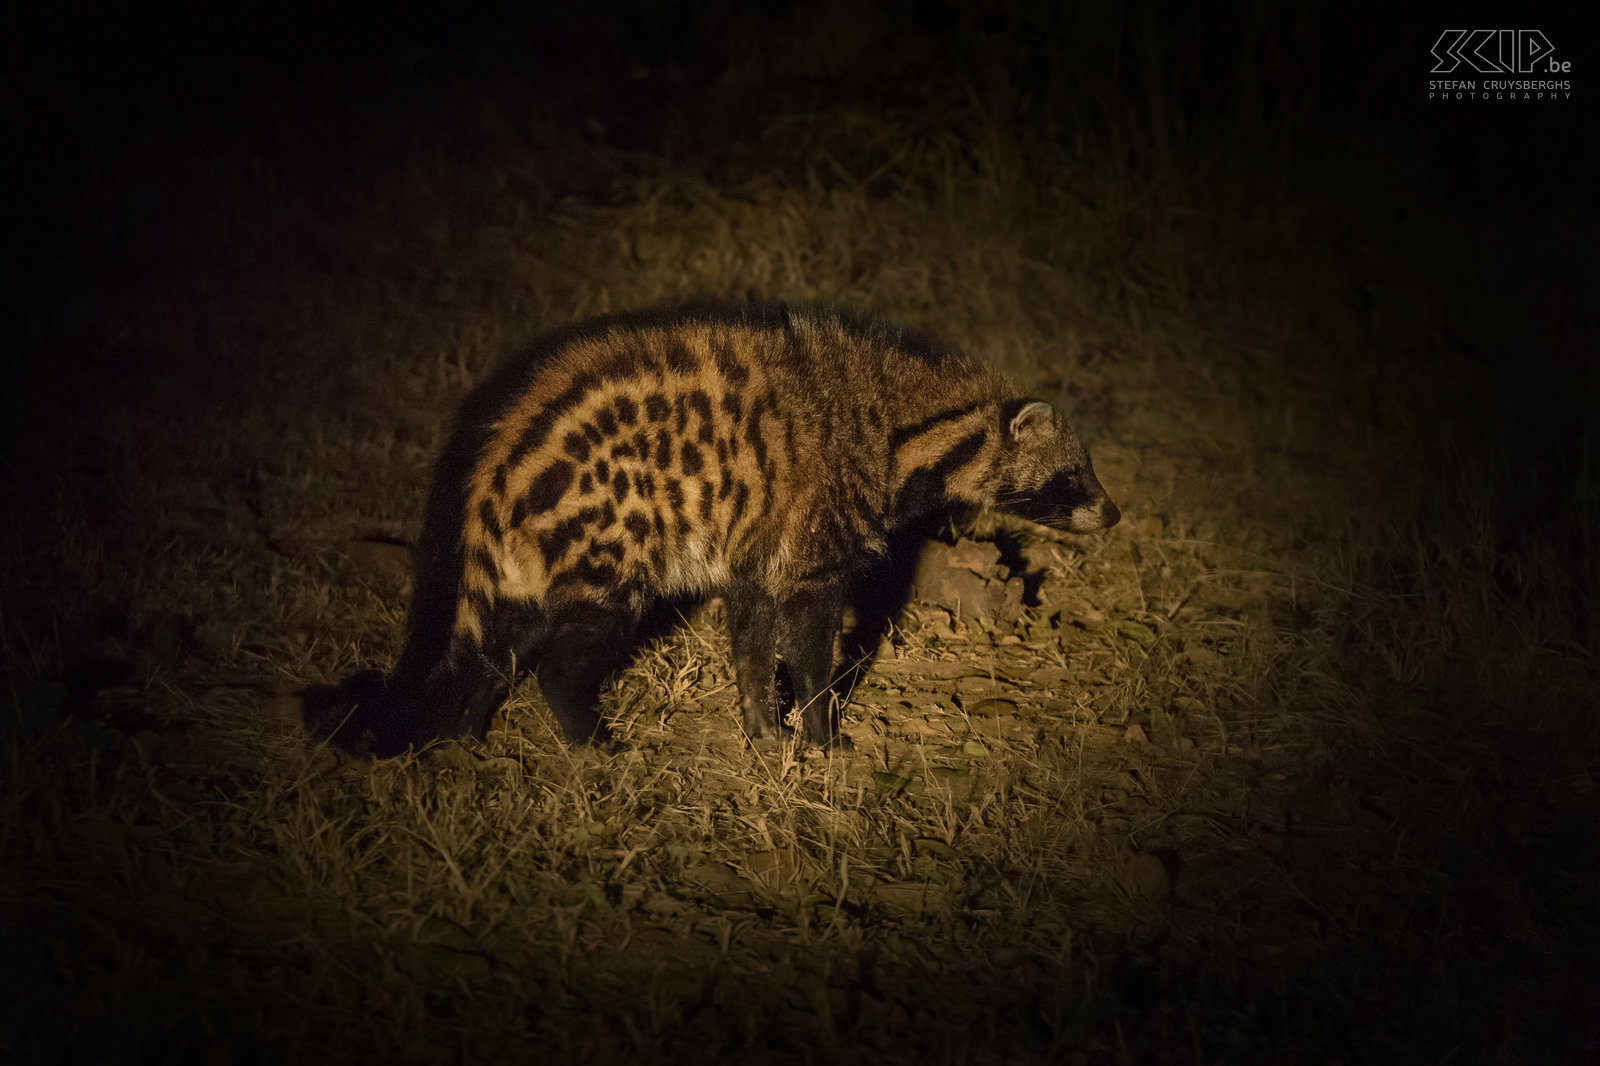 South Luangwa - Civet During the night drive we also encountered a African civet (Civettictis civetta). The civet lives solitary and is primarily nocturnal. It is an omnivorous generalist, taking small vertebrates, invertebrates, eggs and also some plants and fruits.During the night drive we also encountered a African civet (Civettictis civetta). The civet lives solitary and is primarily nocturnal. It is an omnivorous generalist, taking small vertebrates, invertebrates, eggs and also some plants and fruits. Stefan Cruysberghs